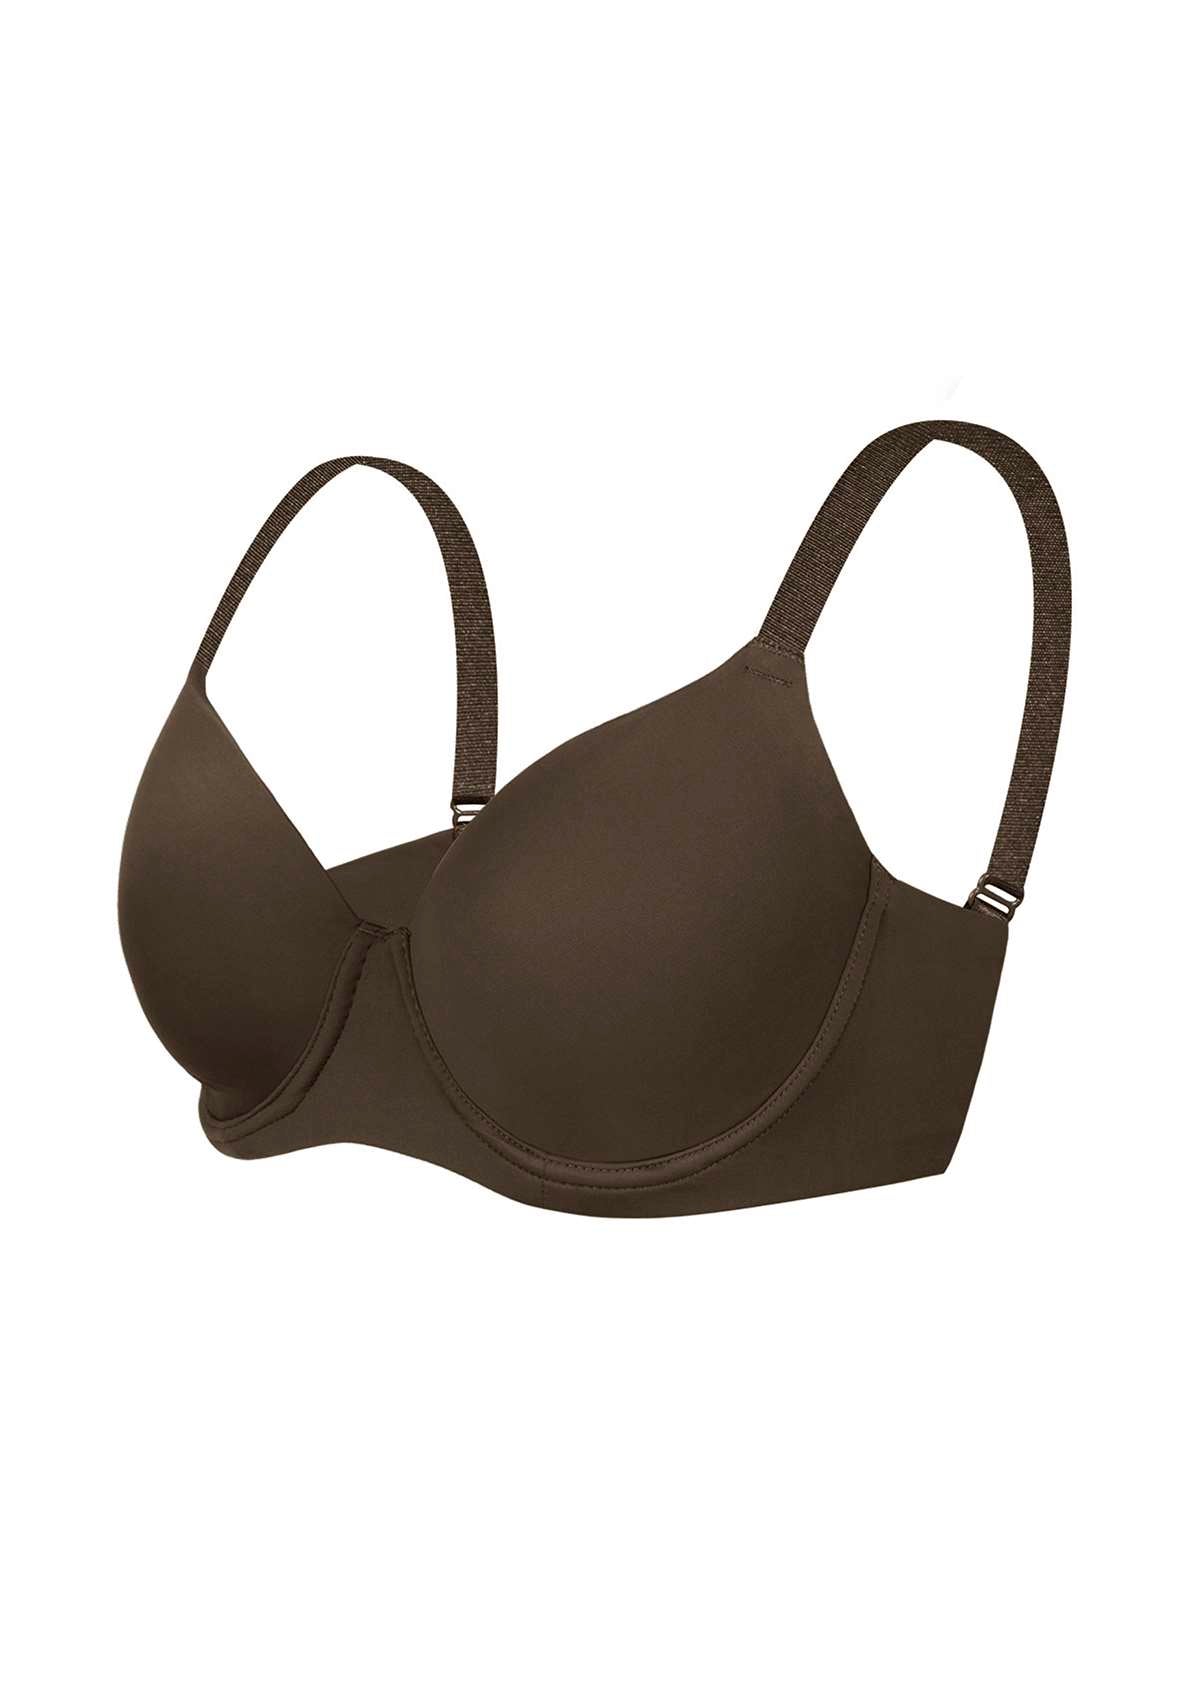 HSIA Gemma Smooth Supportive Padded T-shirt Bra - For Full Figures - Teal Blue / 42 / C